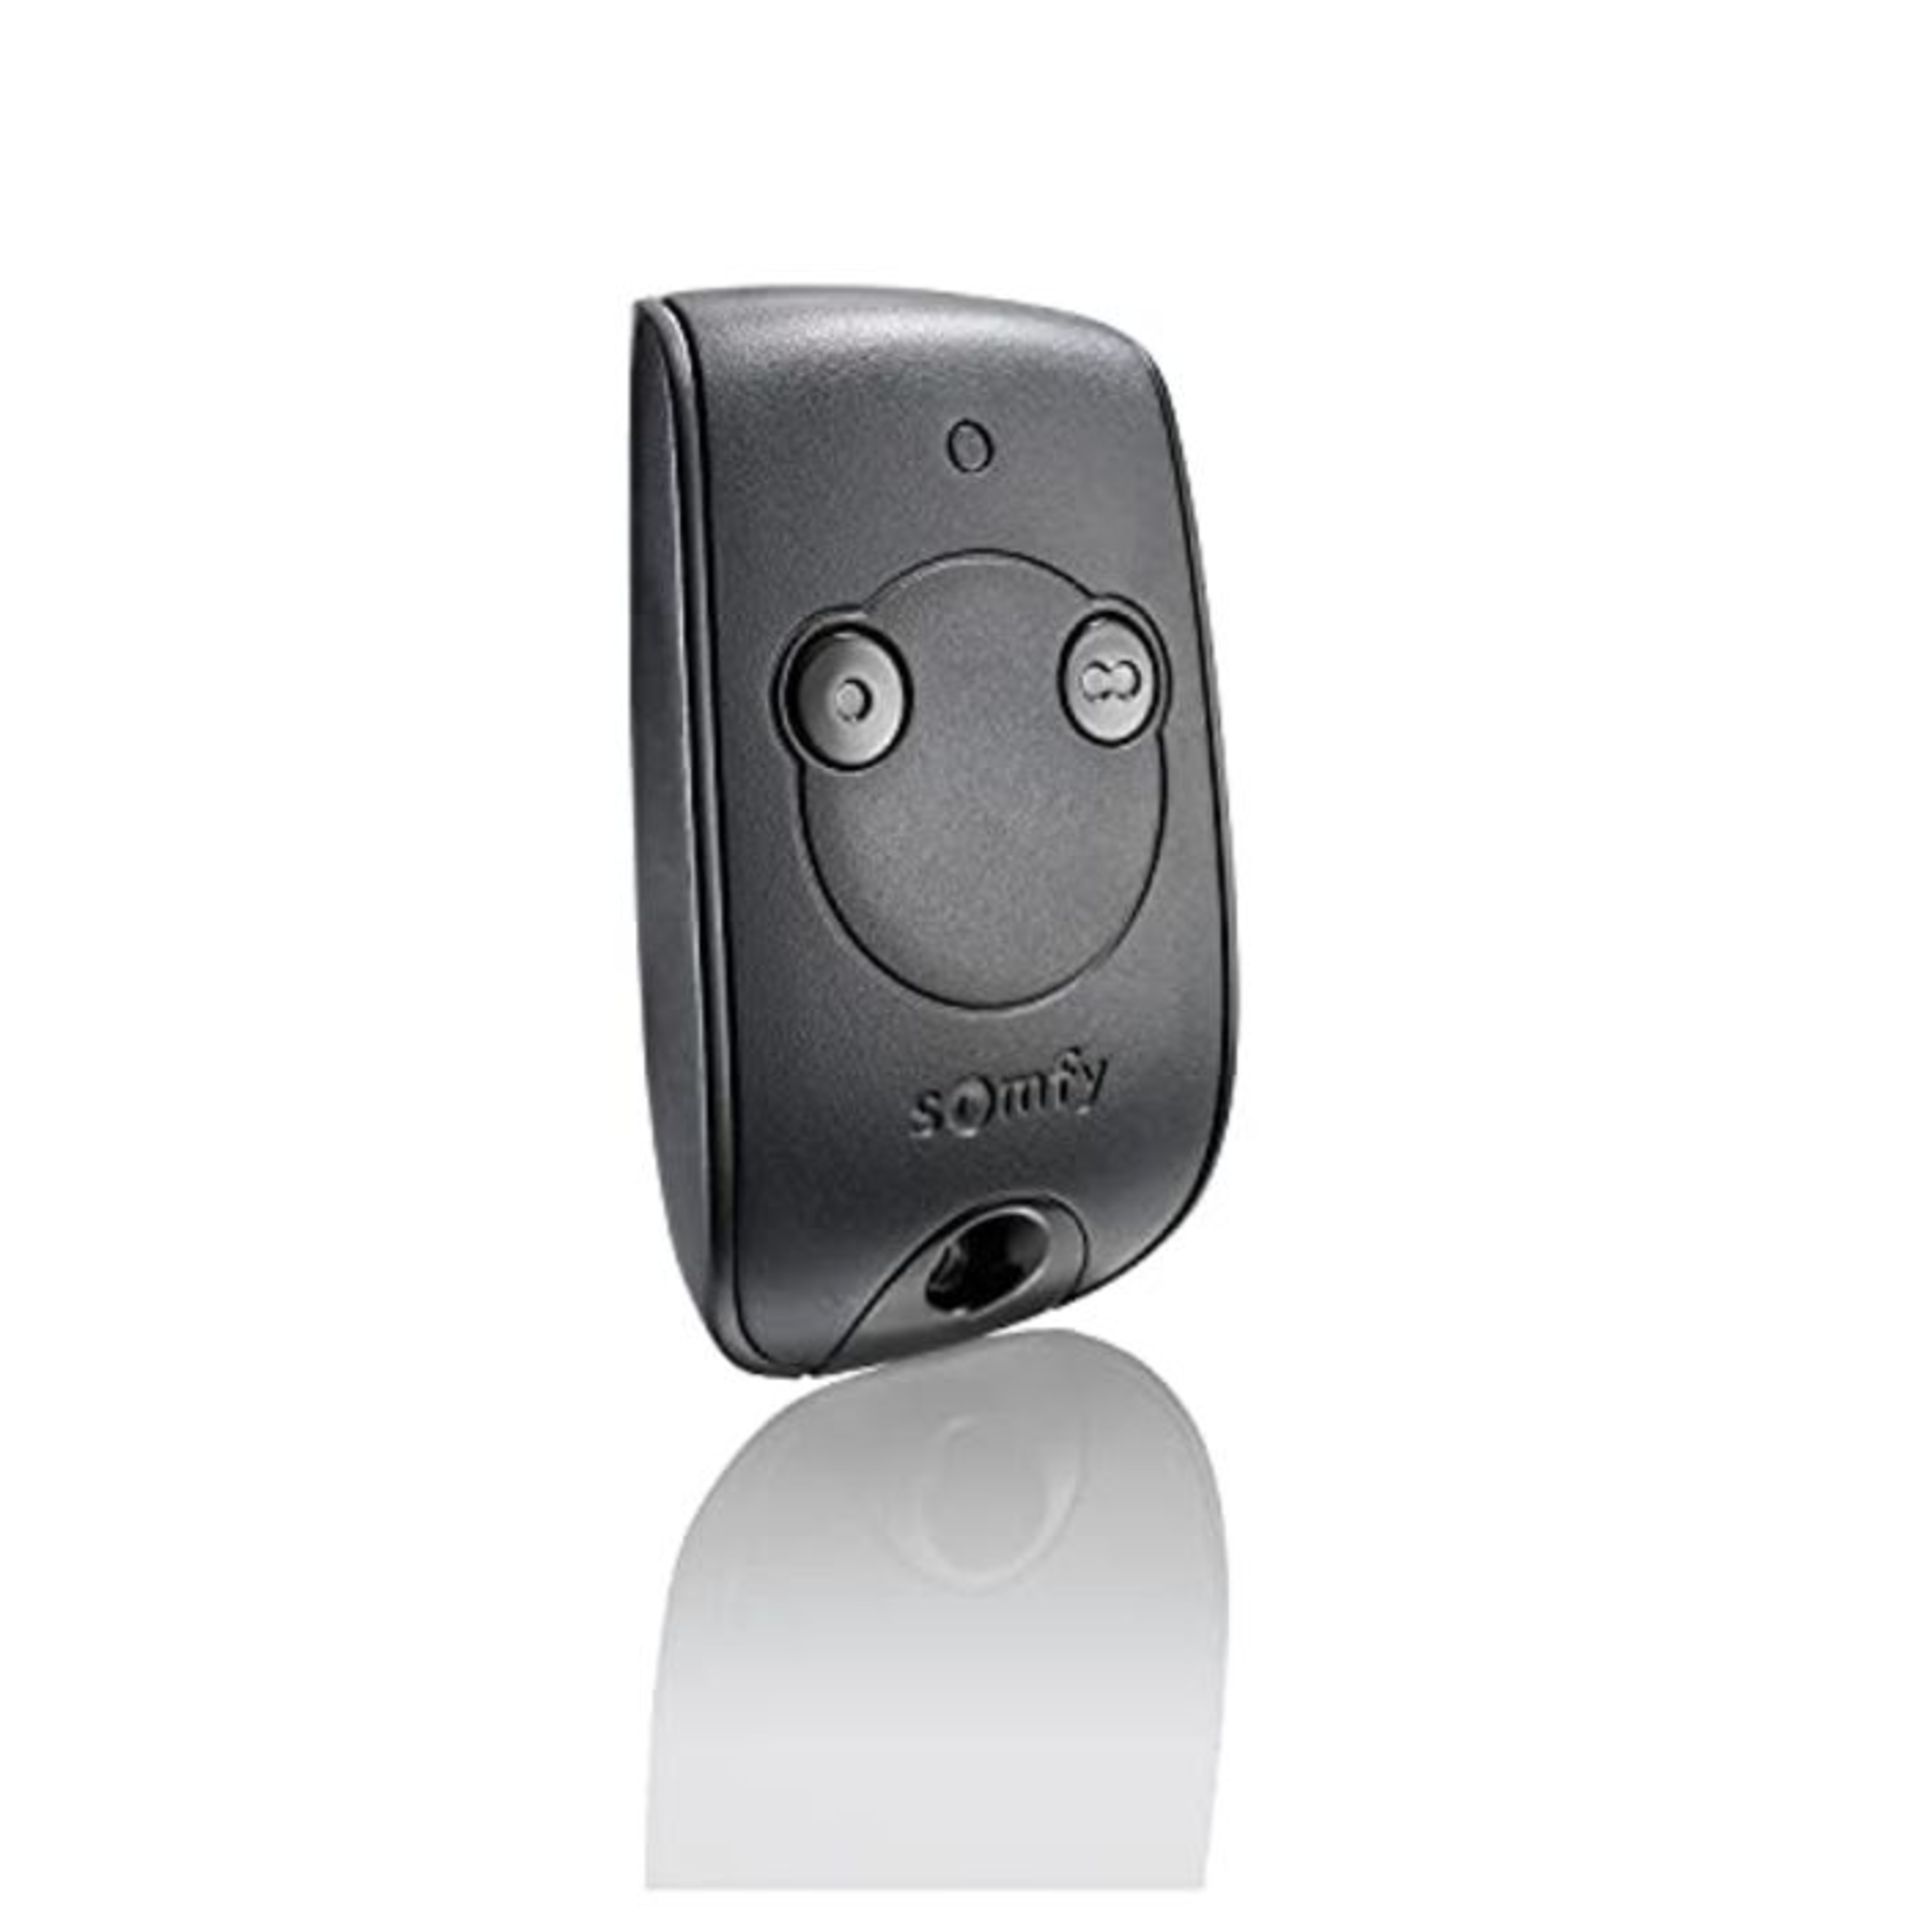 Somfy 1841026C - Keytis 2-channel RTS remote control | For controlling 2 RTS gate and